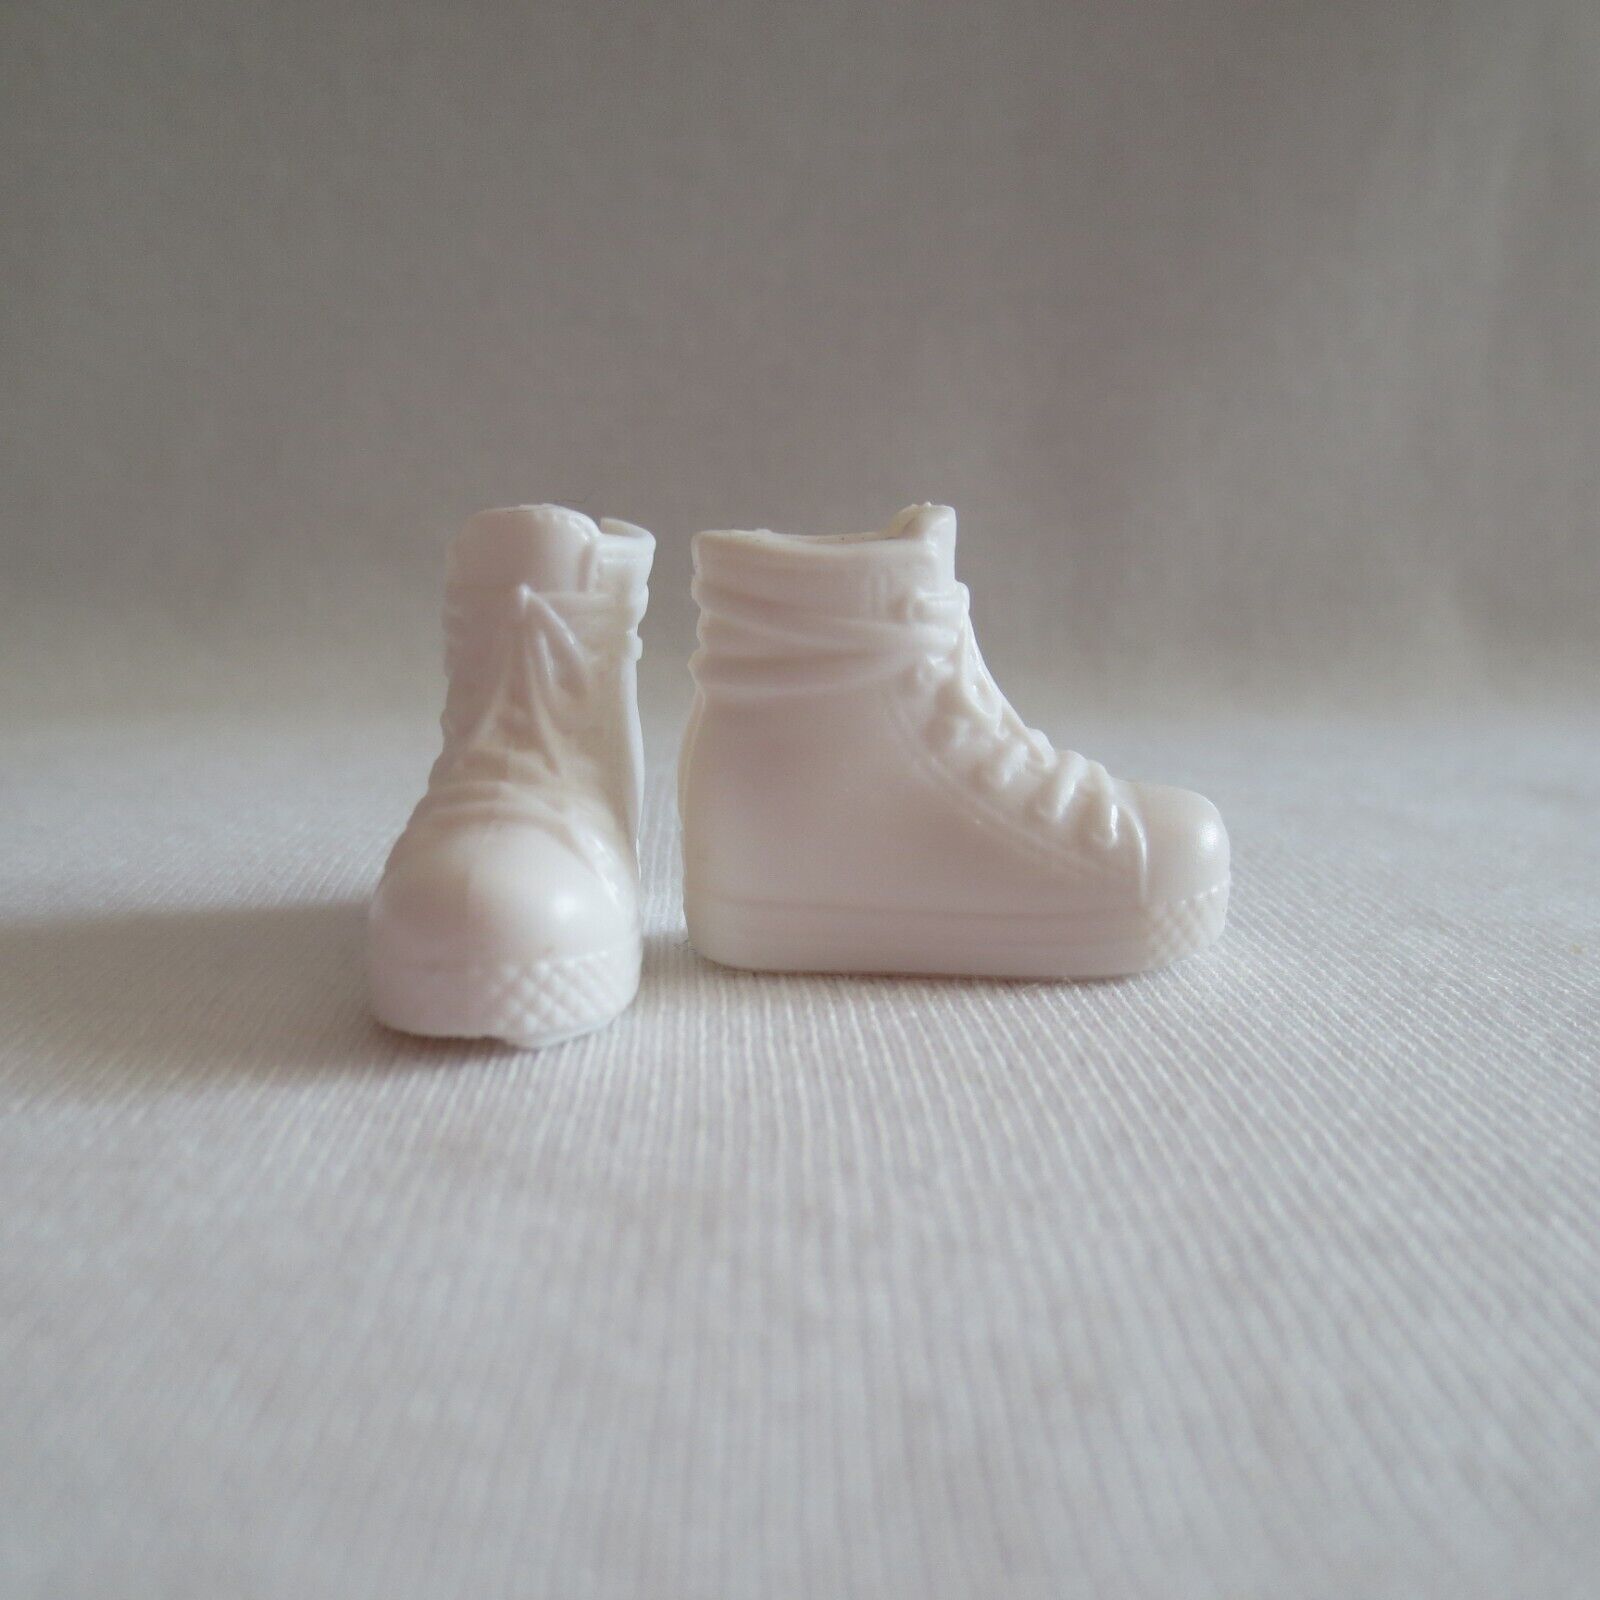 NEW 2021 Barbie Skipper Babysitter Playground Doll White High Top Sneakers Shoes